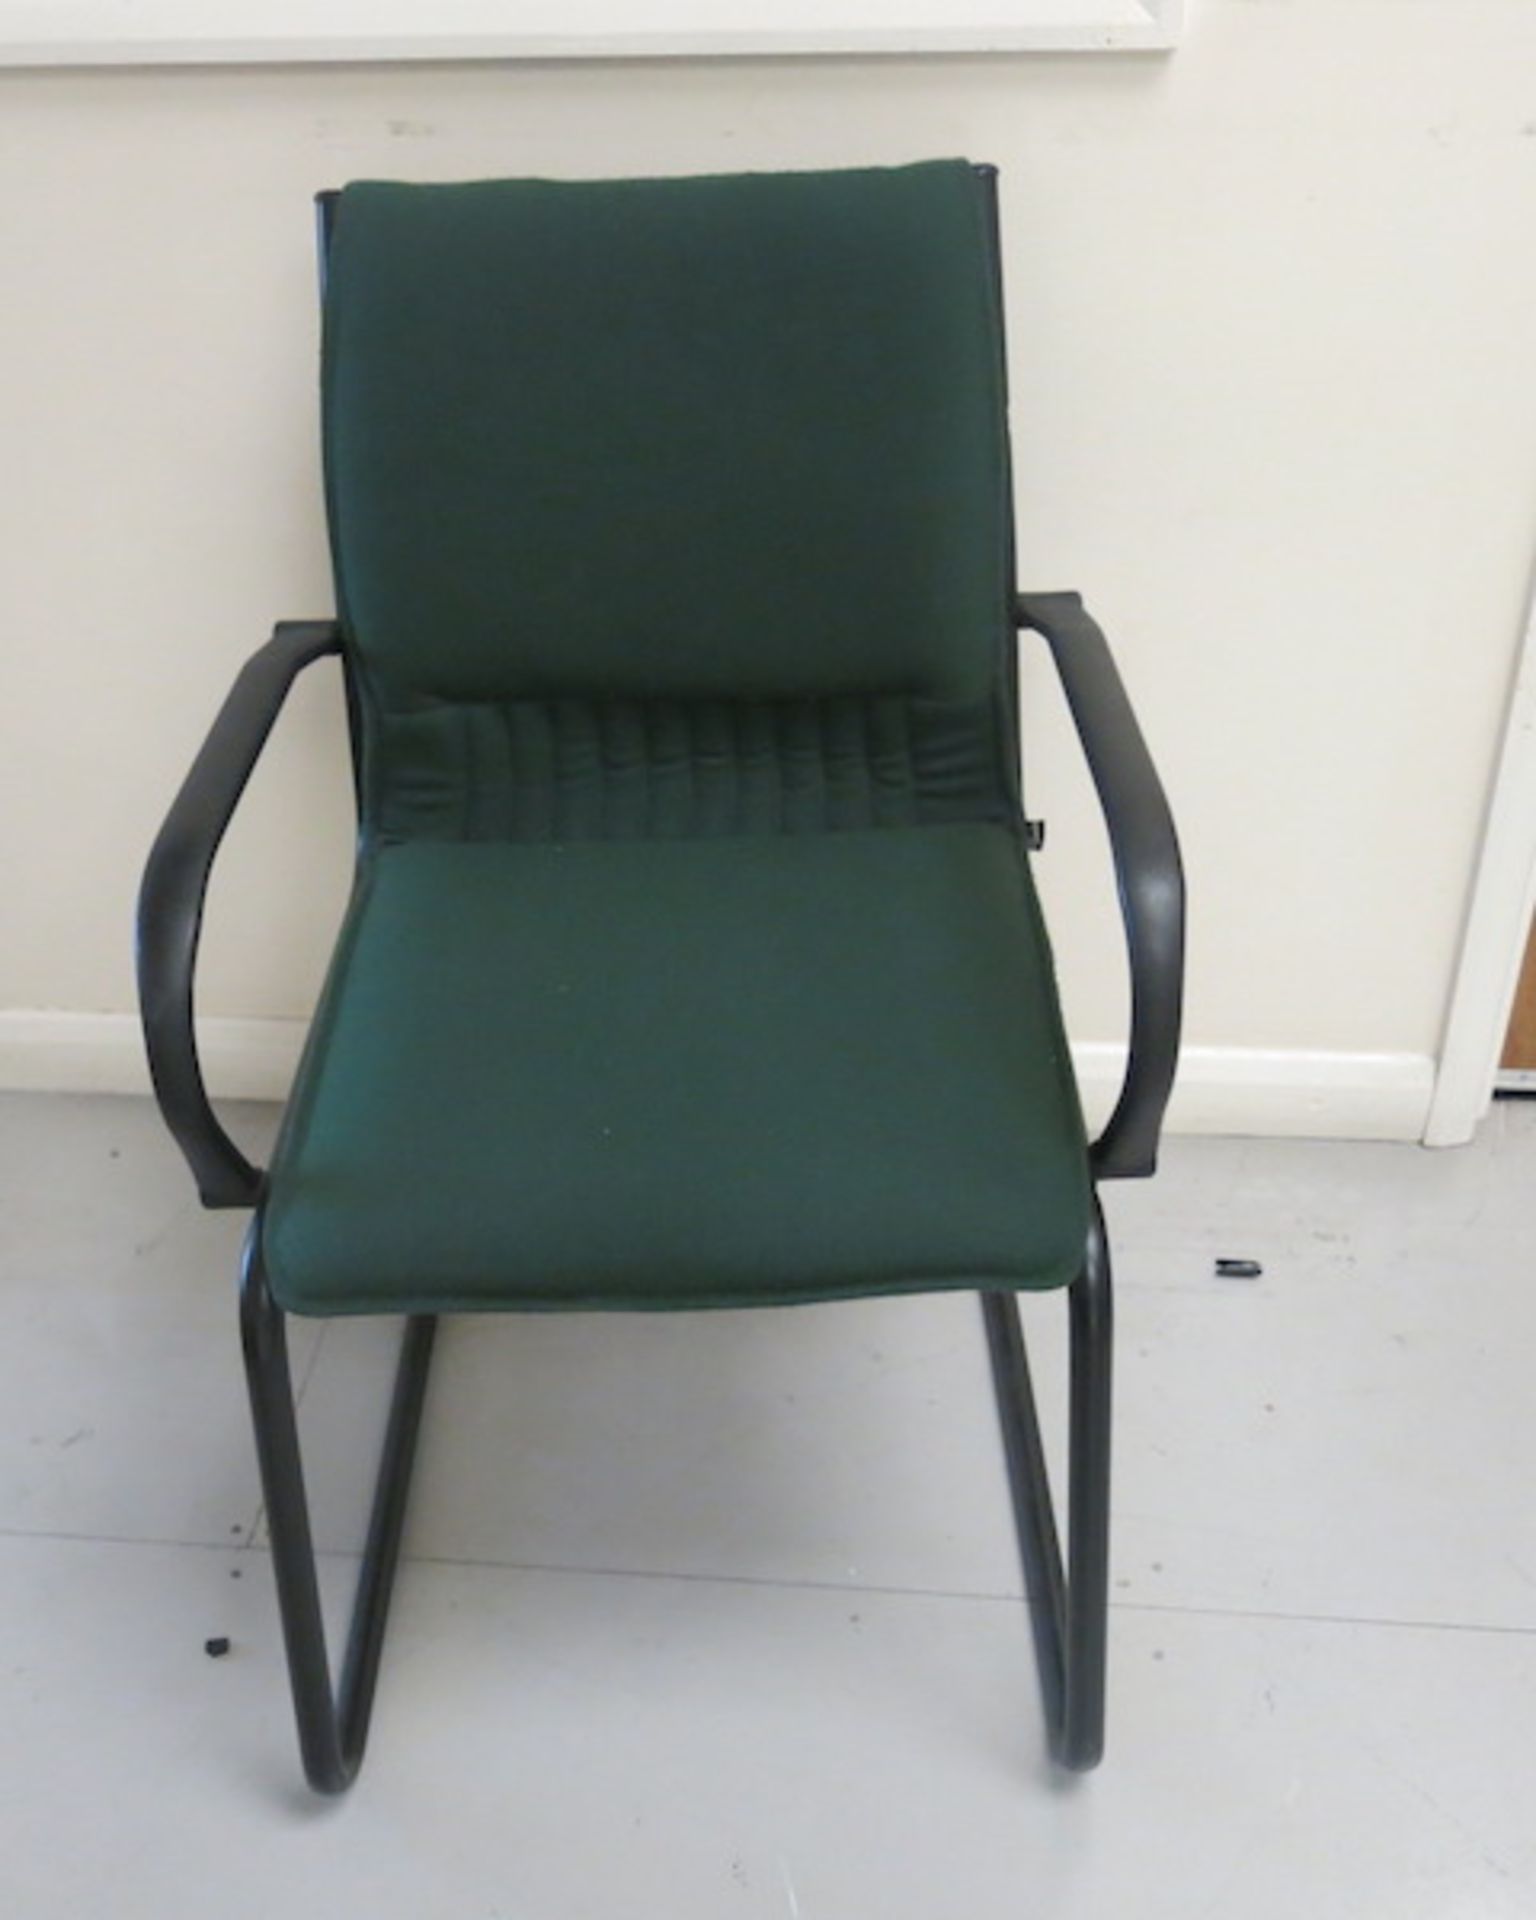 8 x Bottle Green Cantilever Meeting Chairs